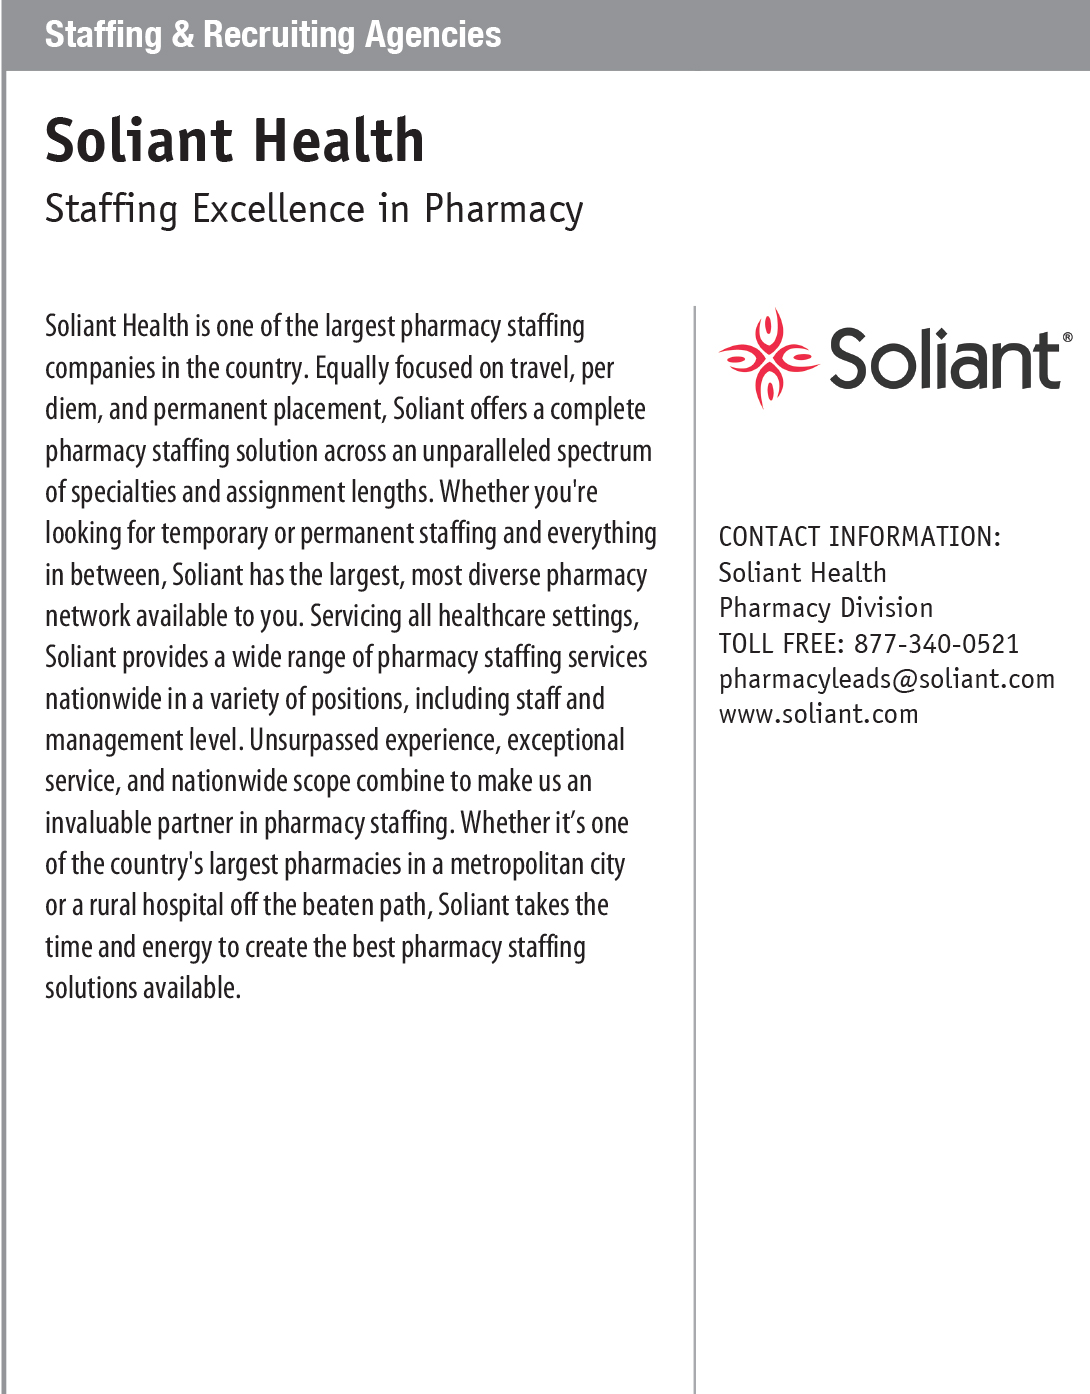 PROFILE_Staffing-_-Recruiting-Agencies---Soliant-Health.jpg